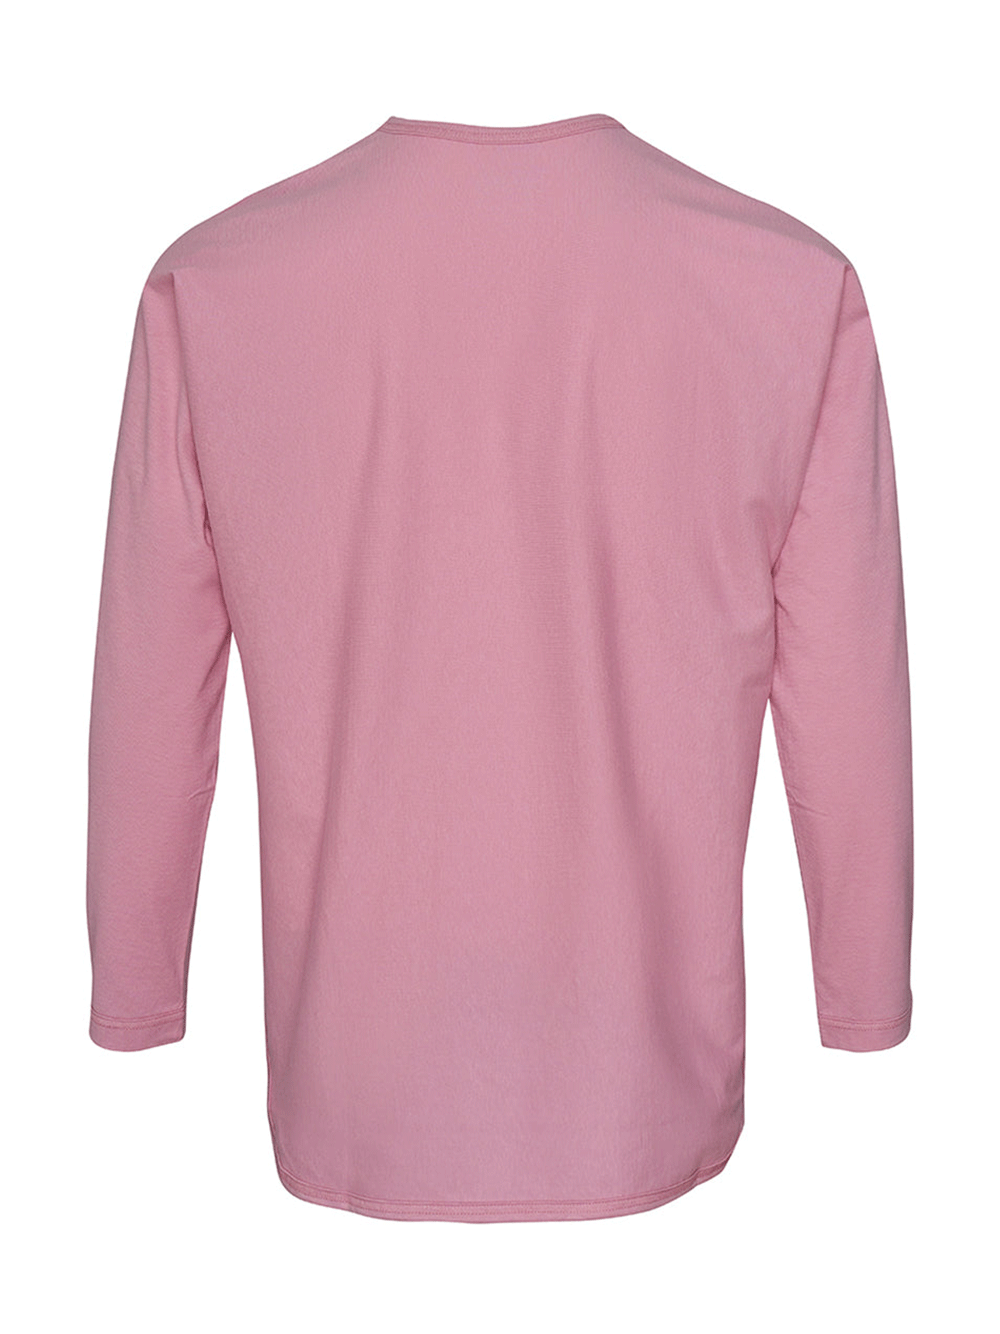 HOMME-PLISSE-ISSEY-MIYAKE-RELEASE-T-2-T-Shirt-Pink-2